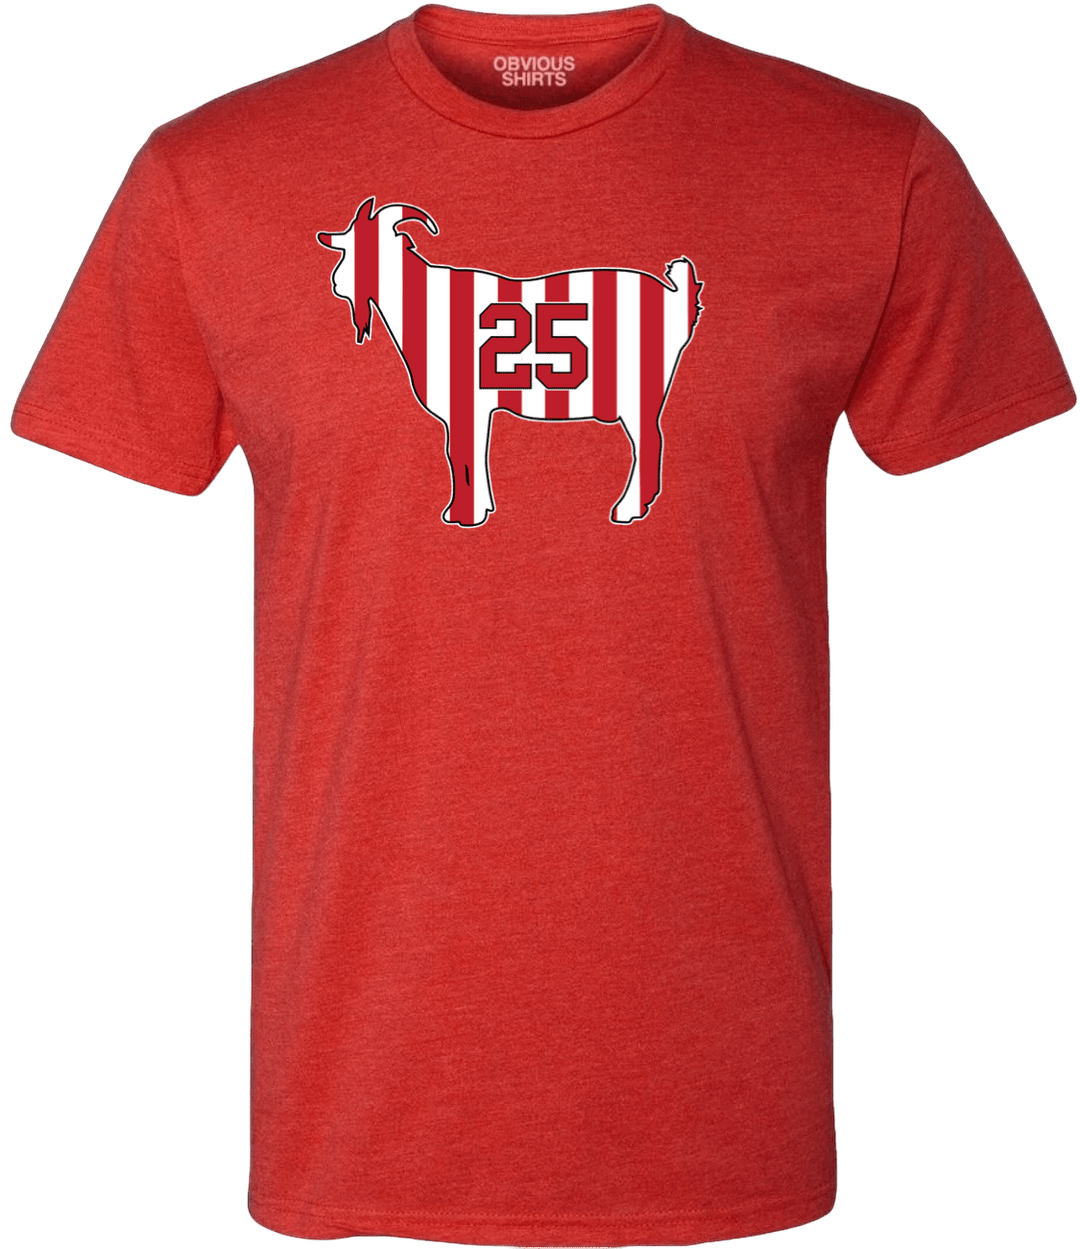 INDIANA GOAT 25 - OBVIOUS SHIRTS